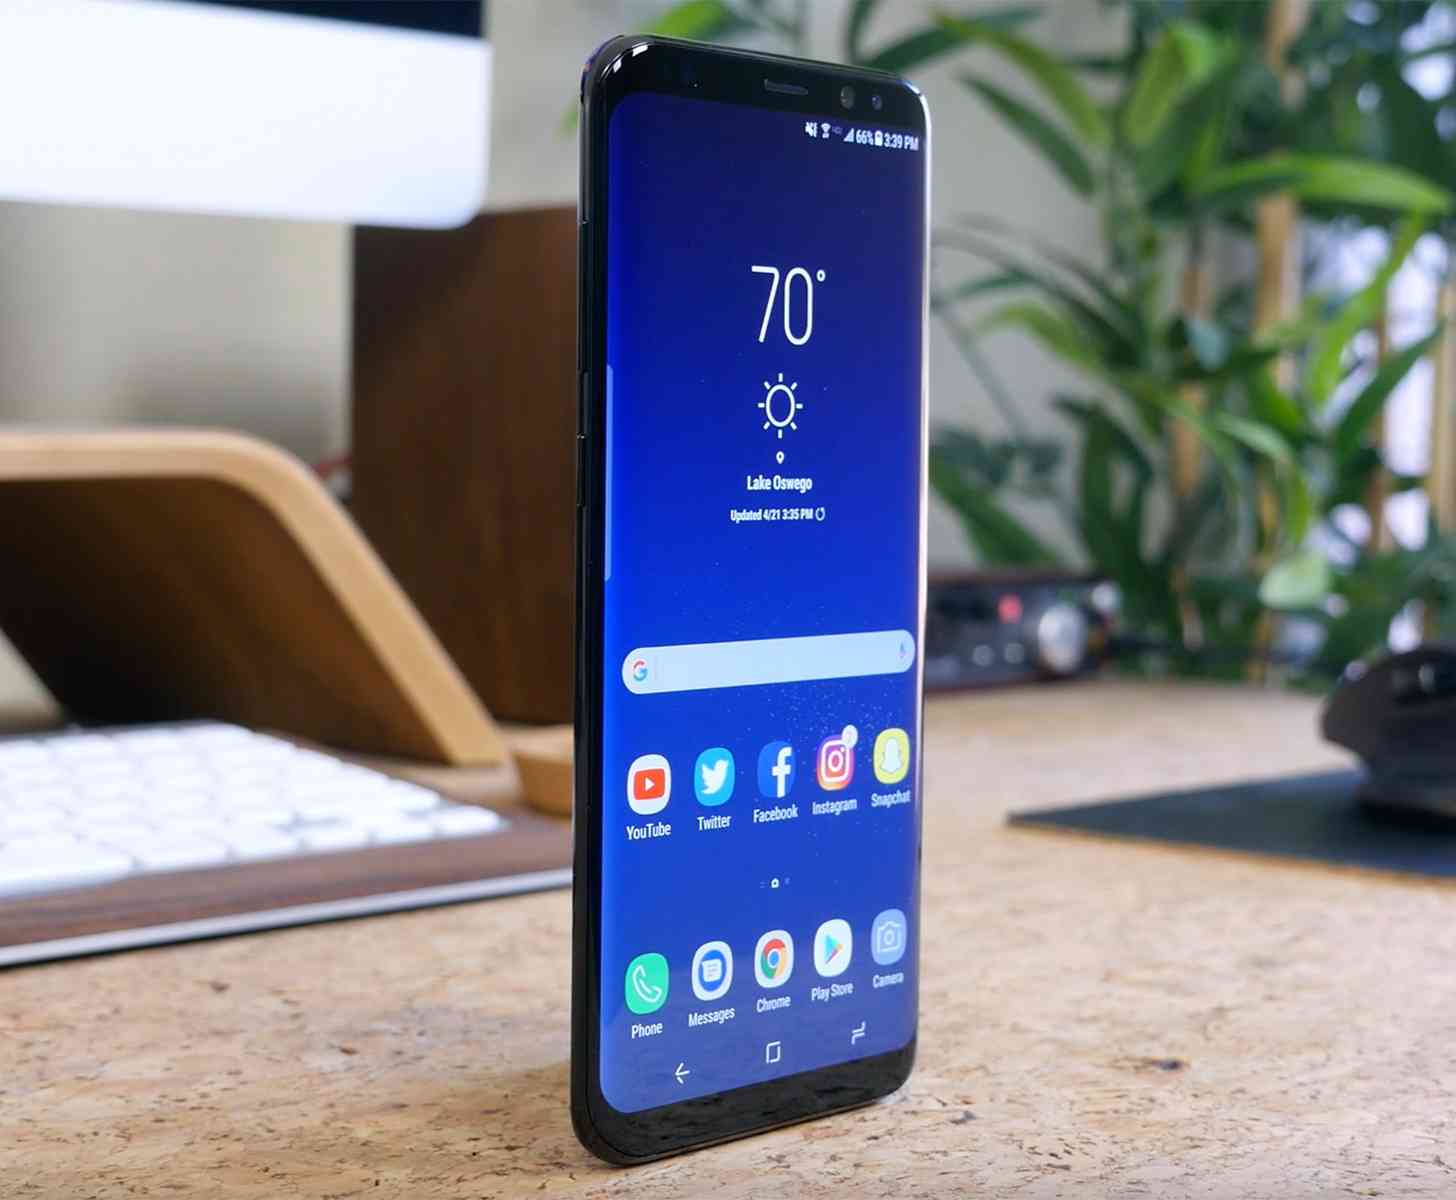 Samsung Galaxy S8+ hands-on review